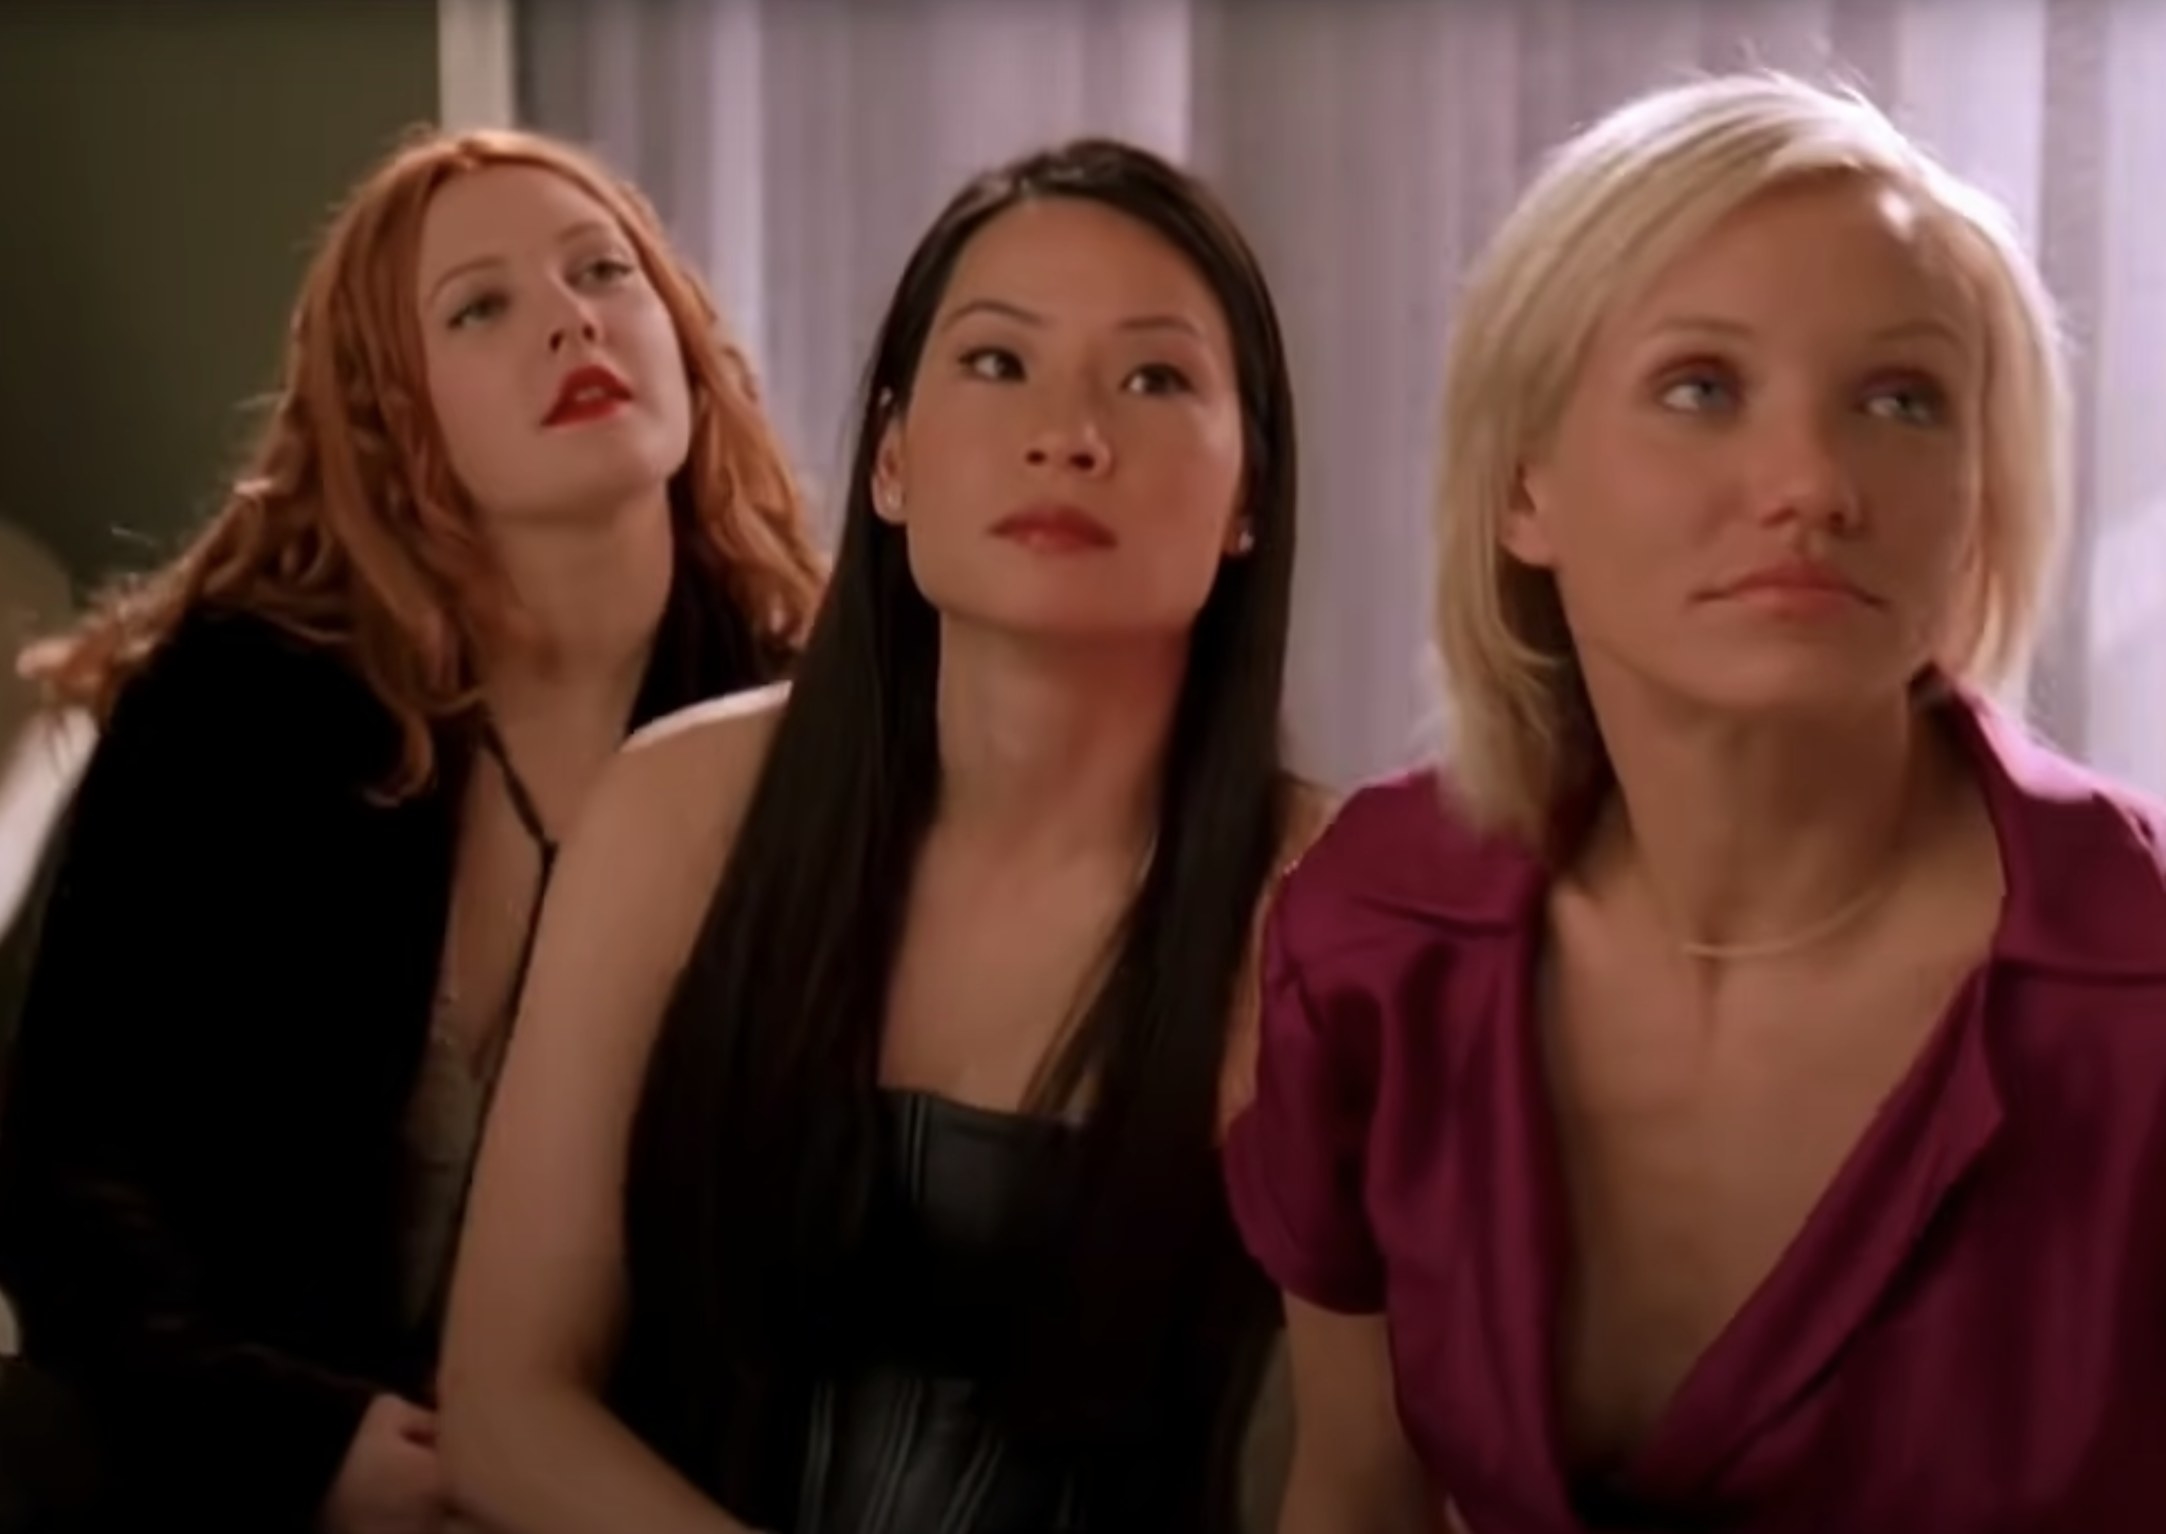 Cameron Diaz as Natalie Cook Drew Barrymore as Dylan Sanders and Lucy Liu as Alex Munday